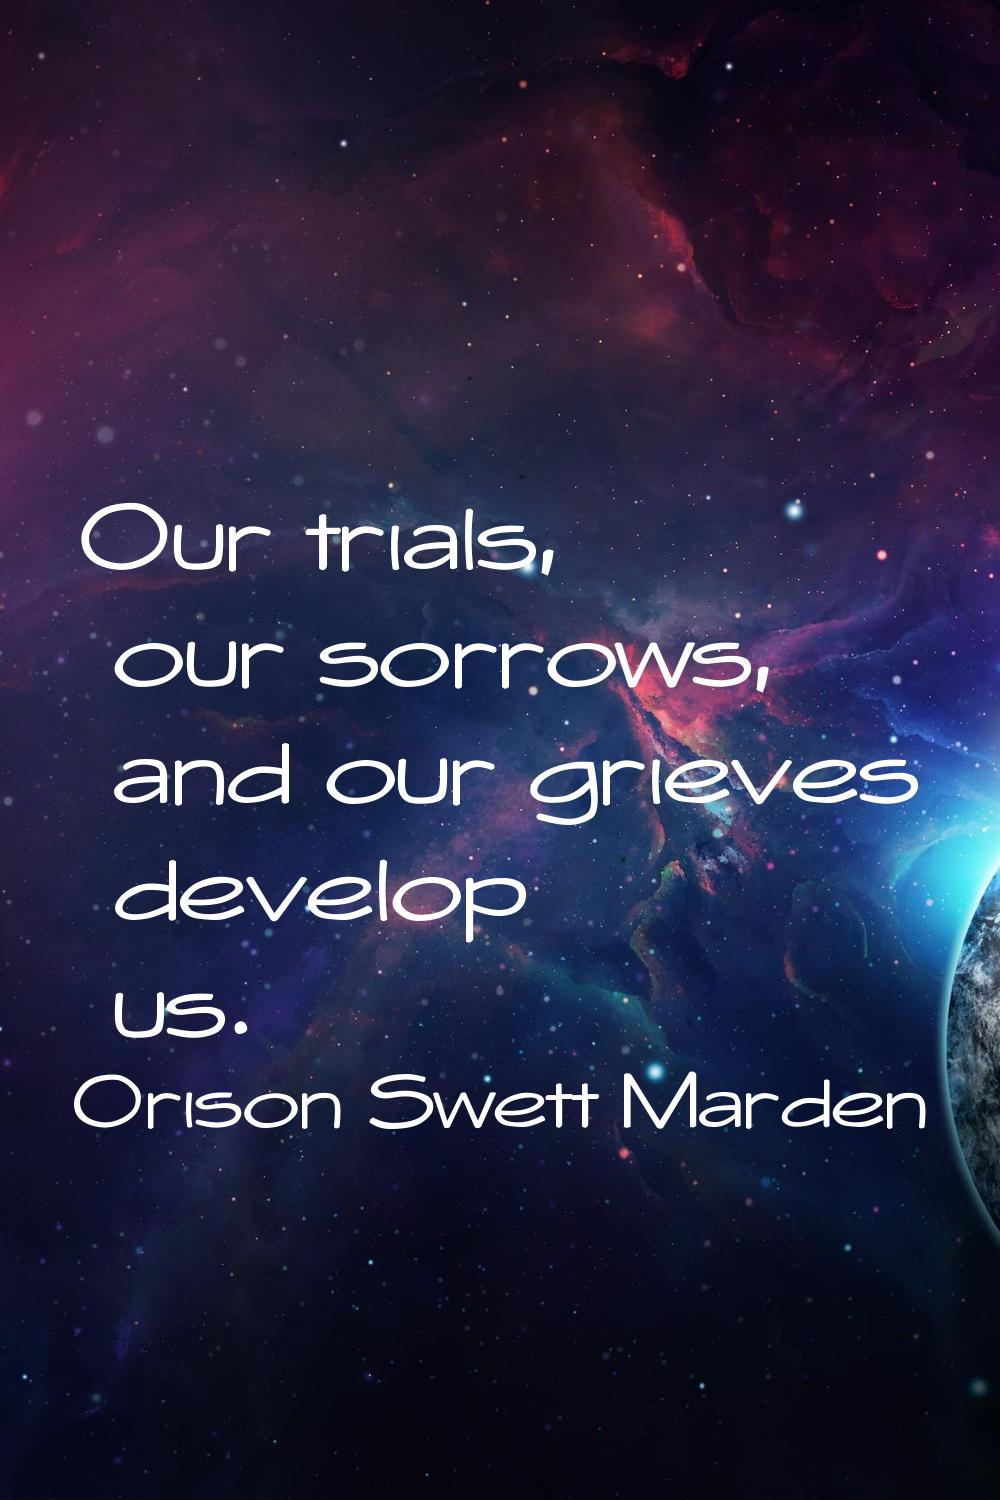 Our trials, our sorrows, and our grieves develop us.